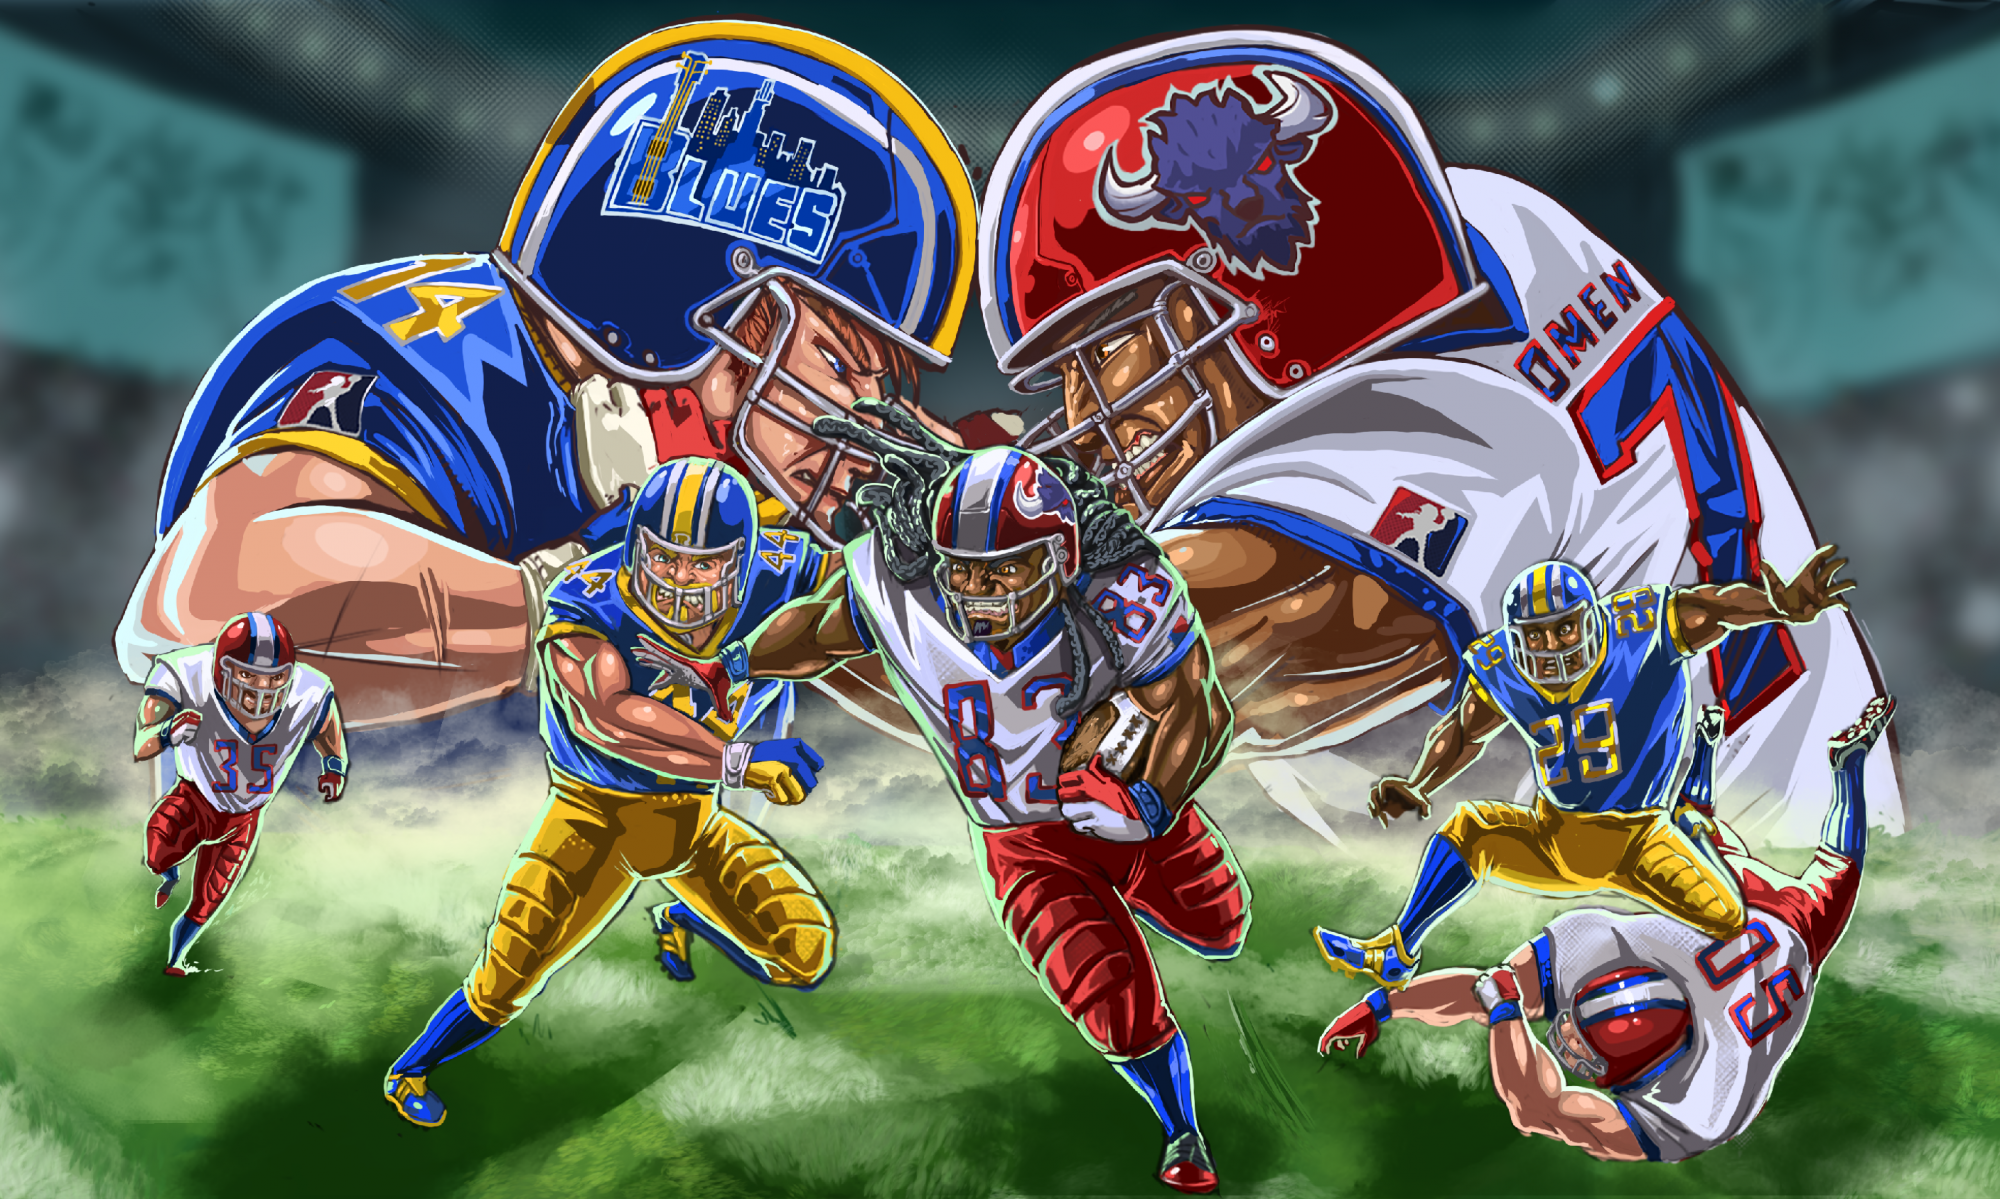 Forget Madden, Legend Bowl is the American Football game you should play VG247